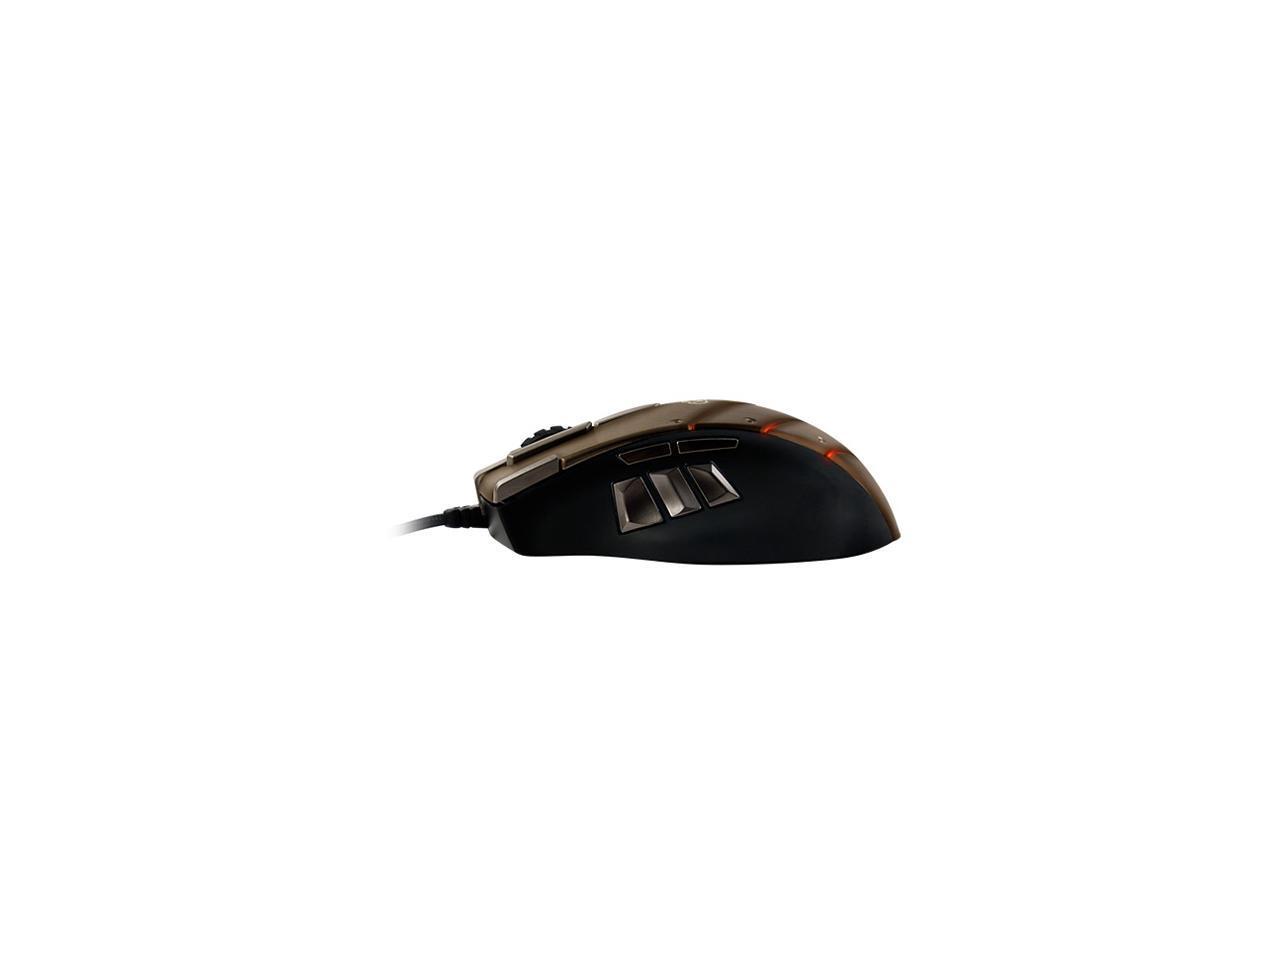 steelseries wow mouse cant bind